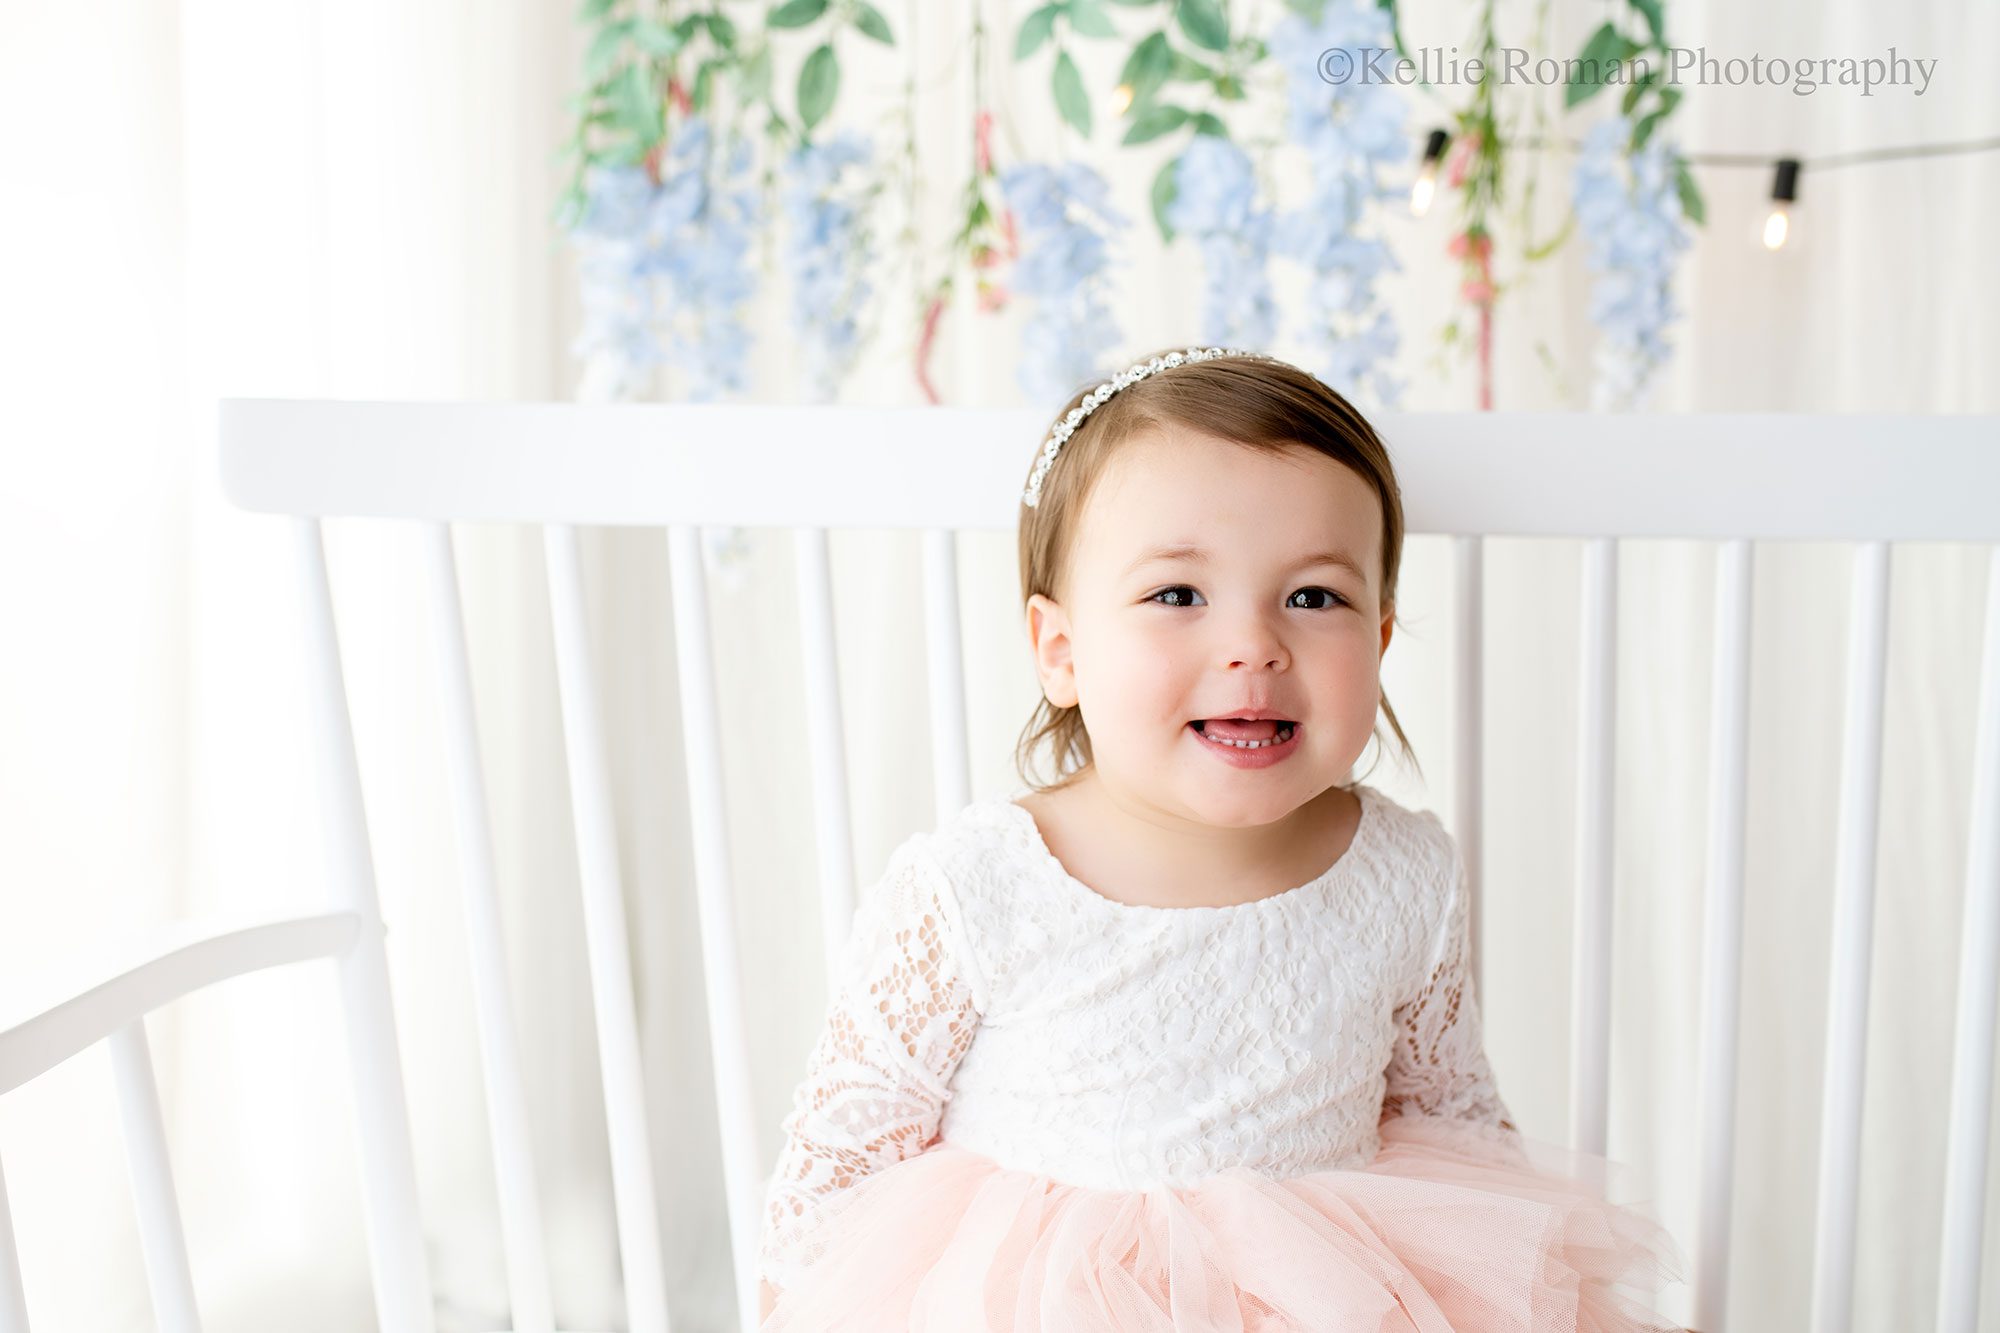 airy milestone Milwaukee. two year old girl is sitting on white wood bench . her dress is white and light pink, the backdrop is all white curtain with hanging flowers.
